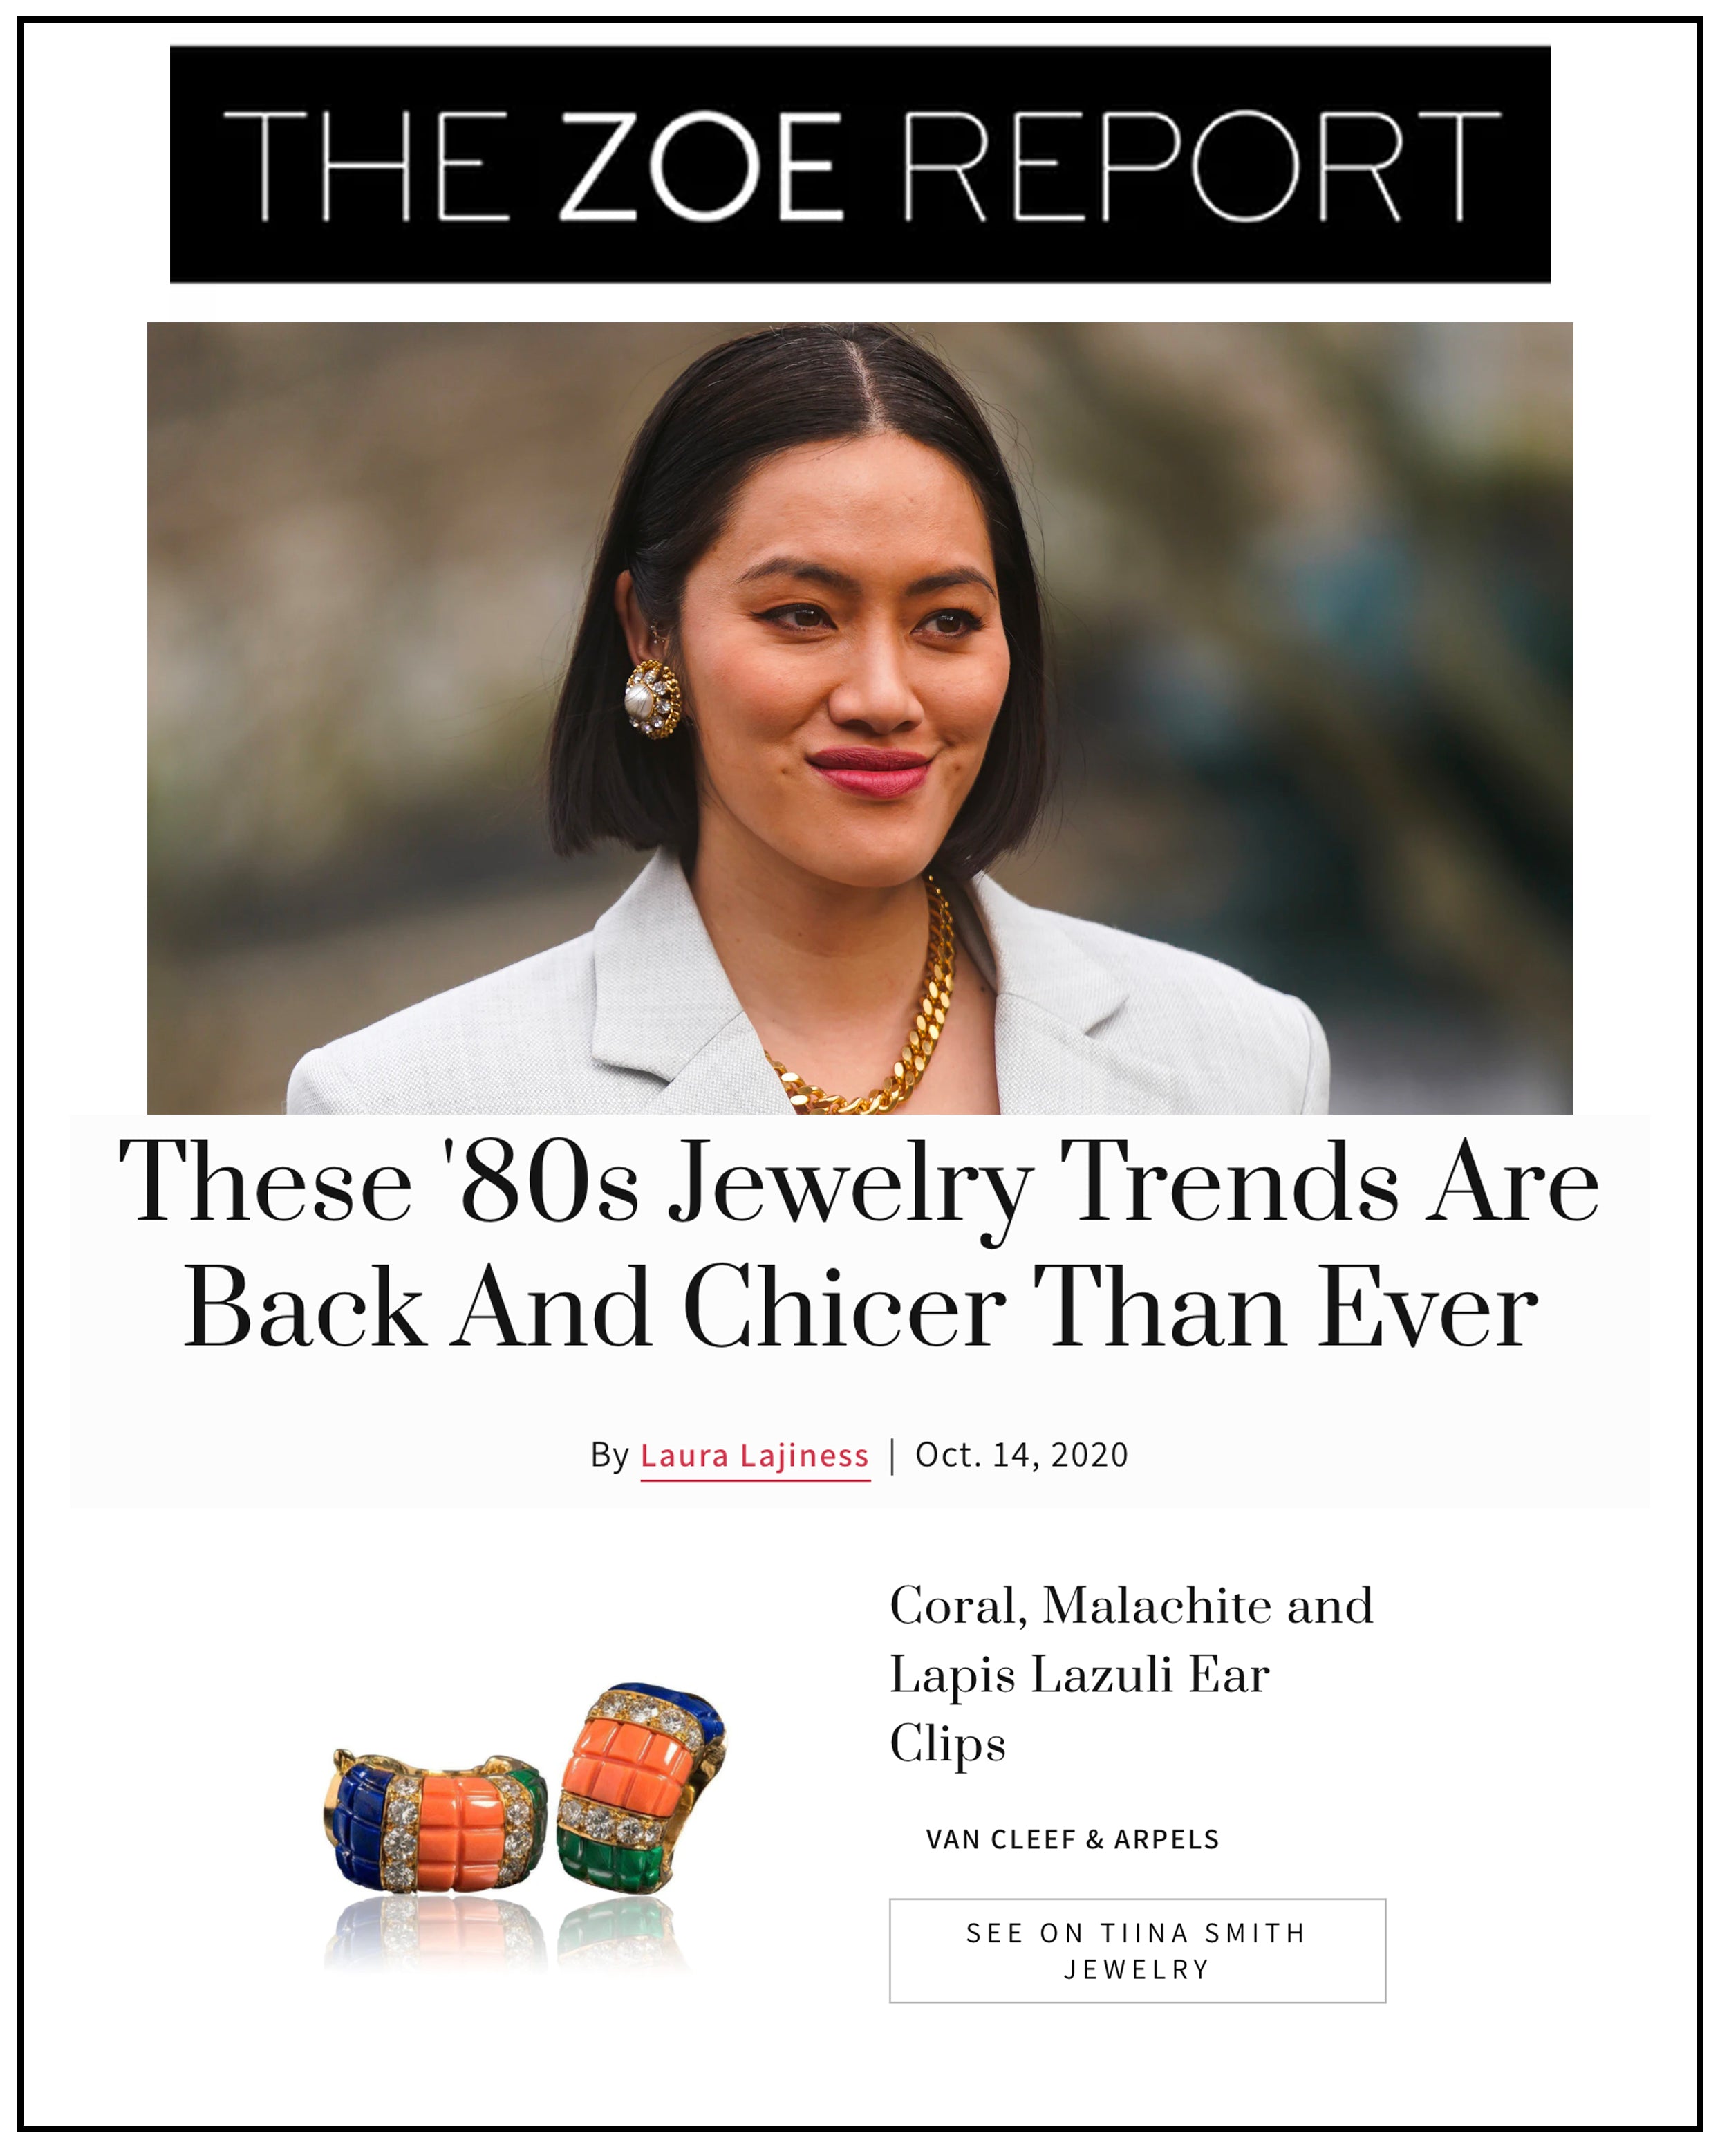 https://www.thezoereport.com/p/these-80s-jewelry-trends-are-back-chicer-than-ever-34982937